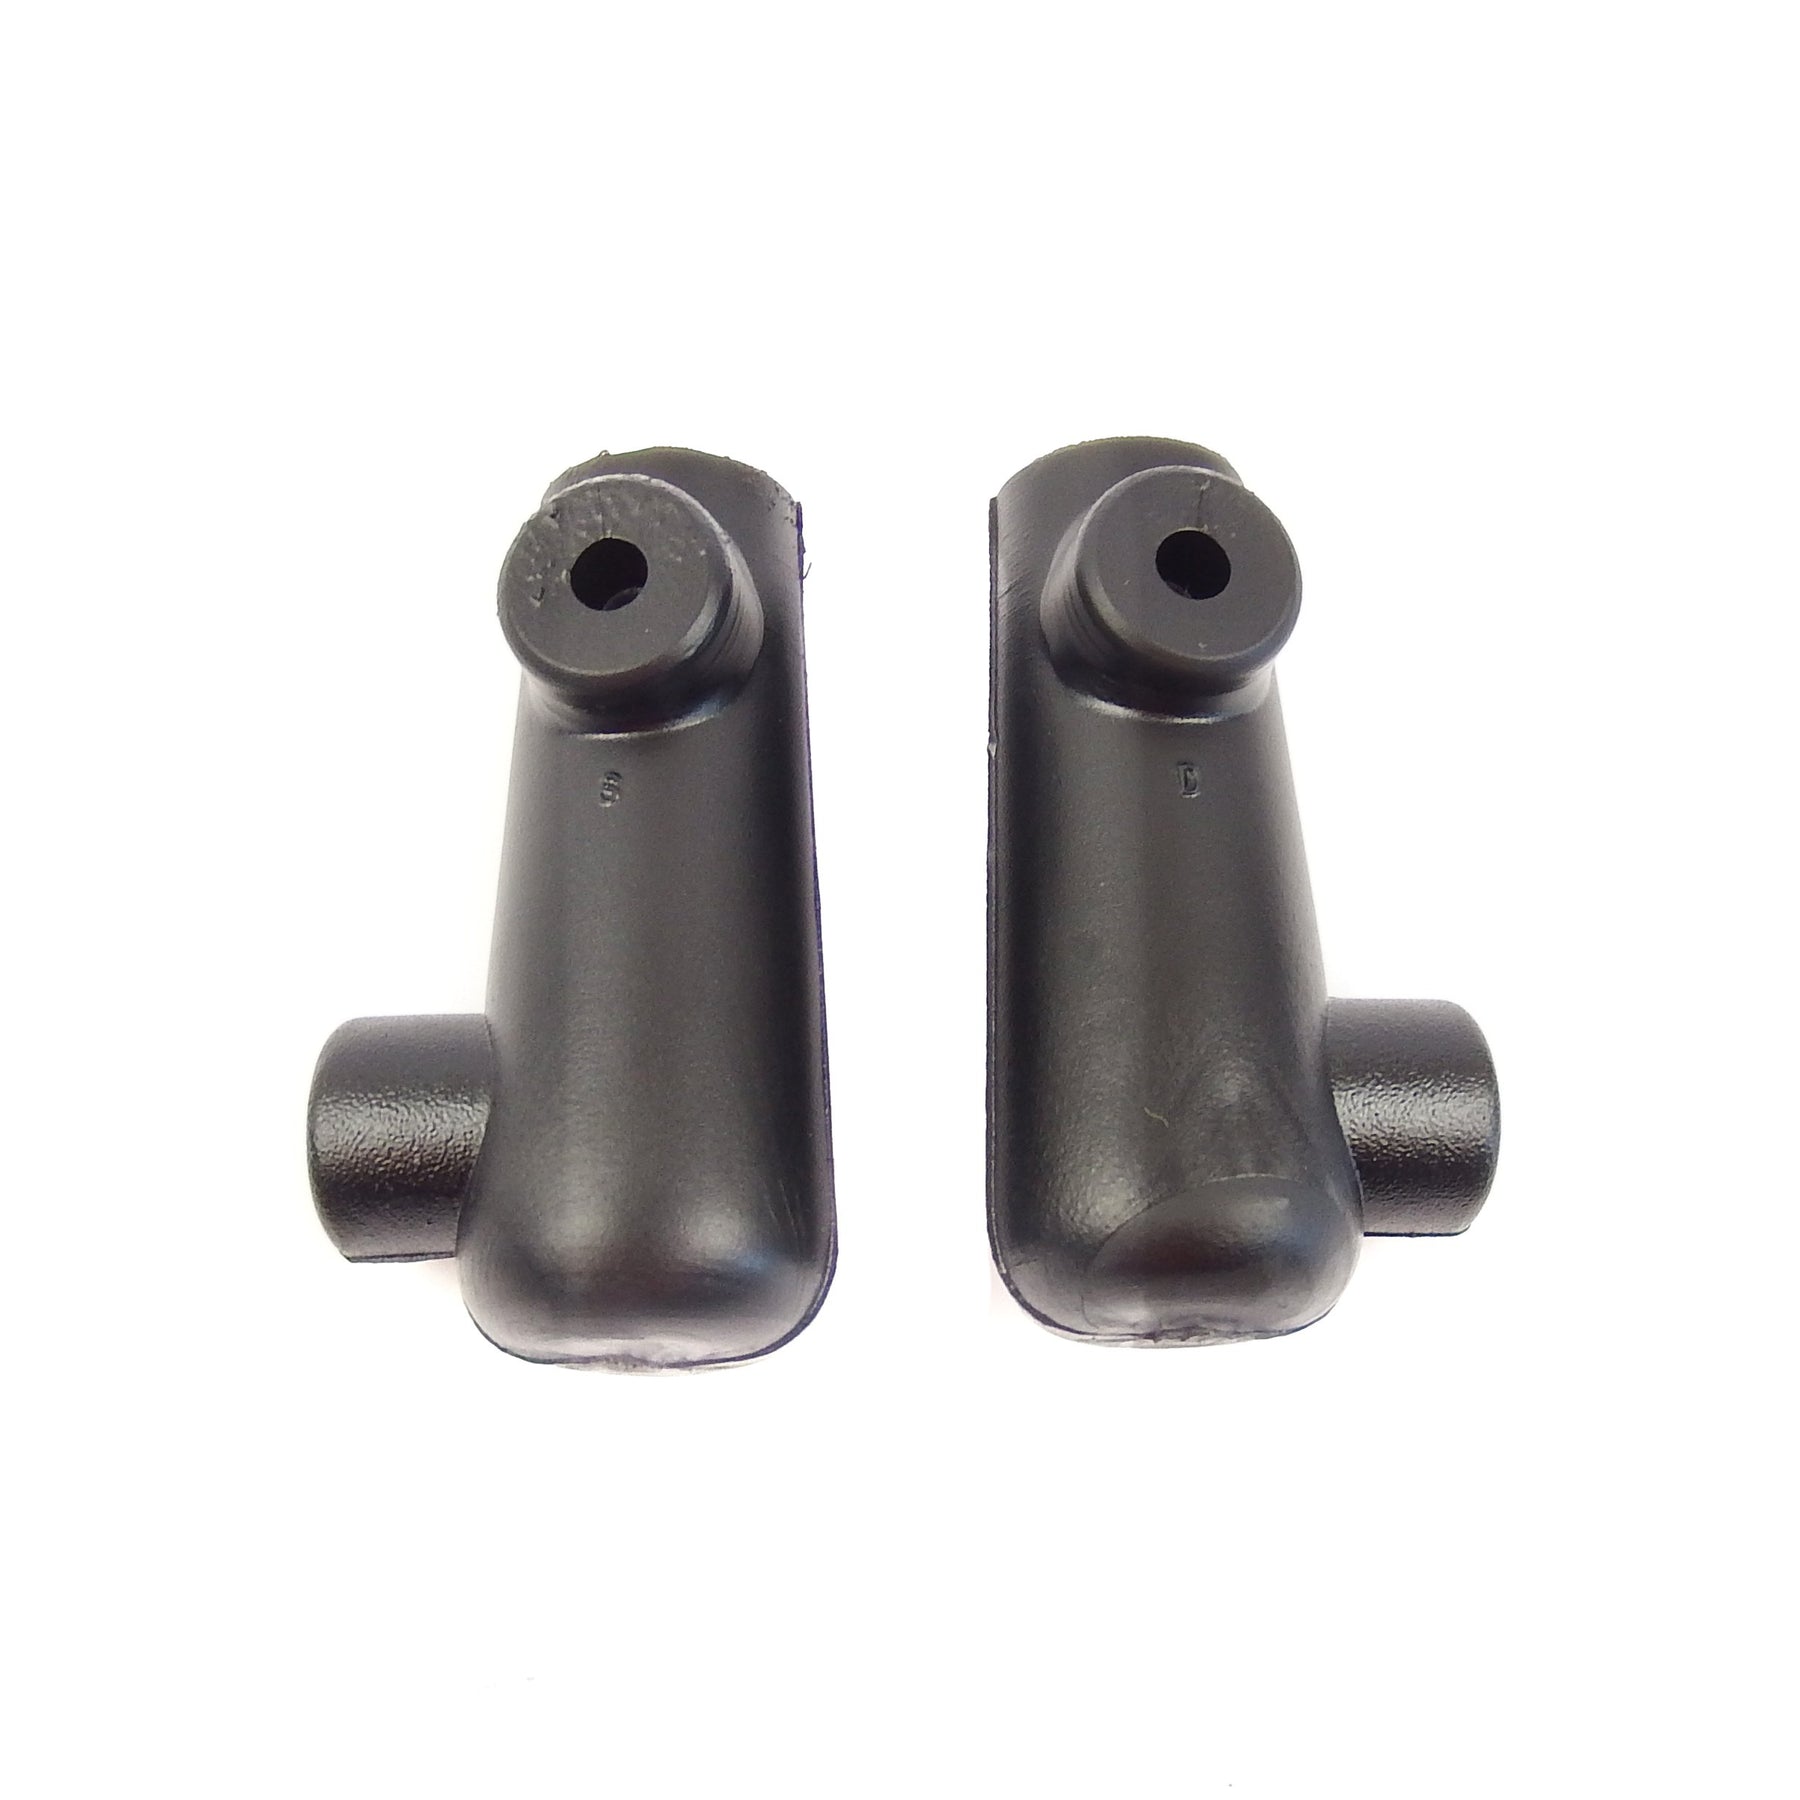 Vespa V90 SS90 16mm Type Centre Stand Feet Rubbers